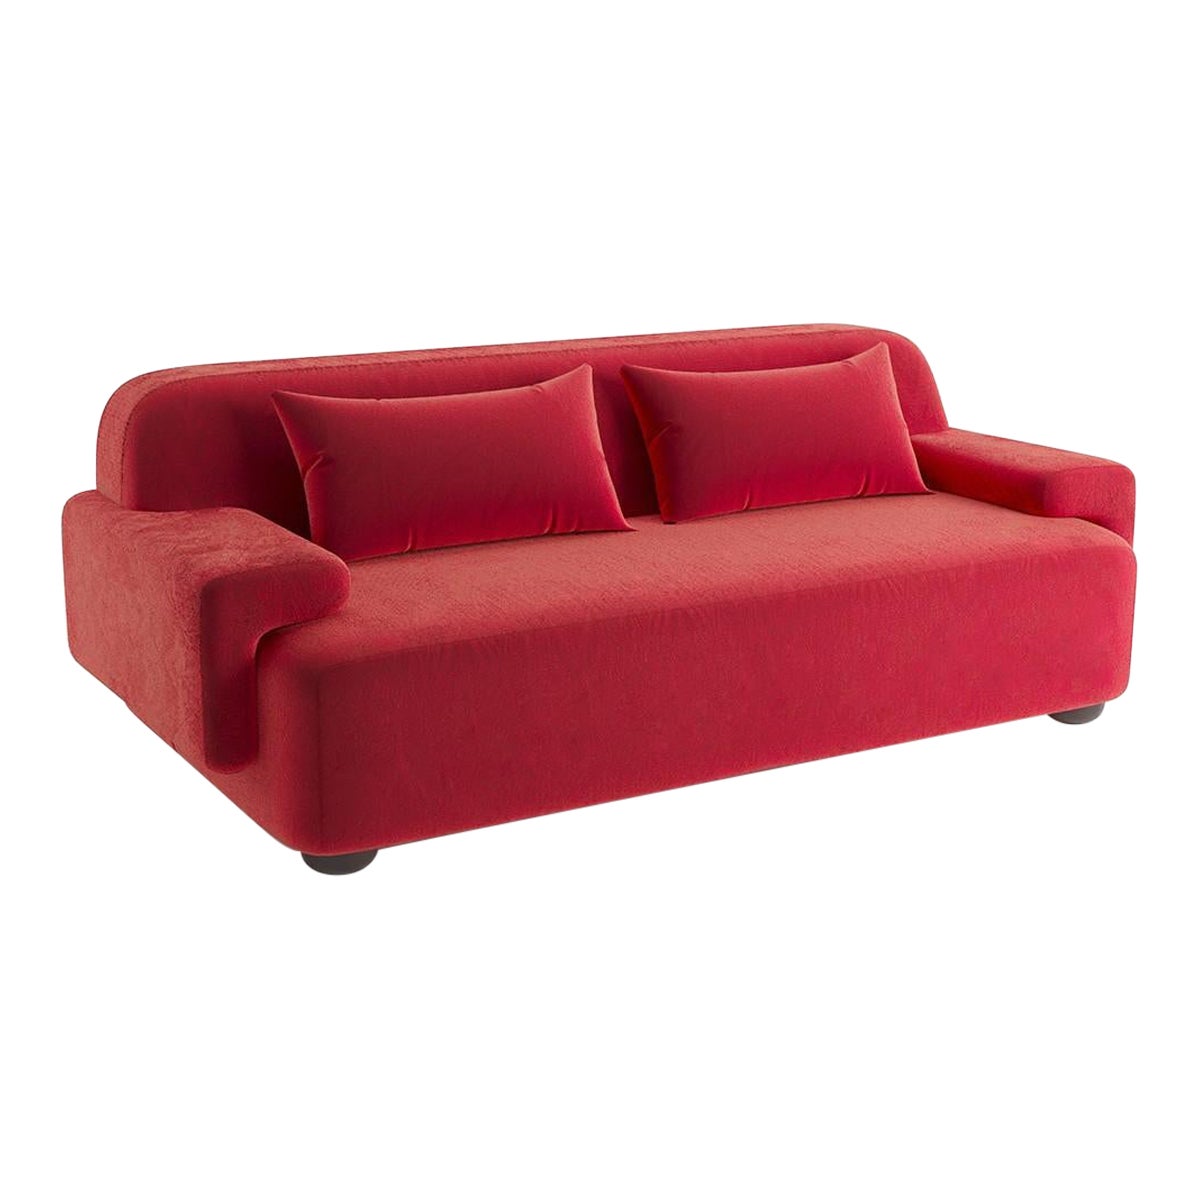 Popus Editions Lena 2.5 Seater Sofa in Red Verone Velvet Upholstery